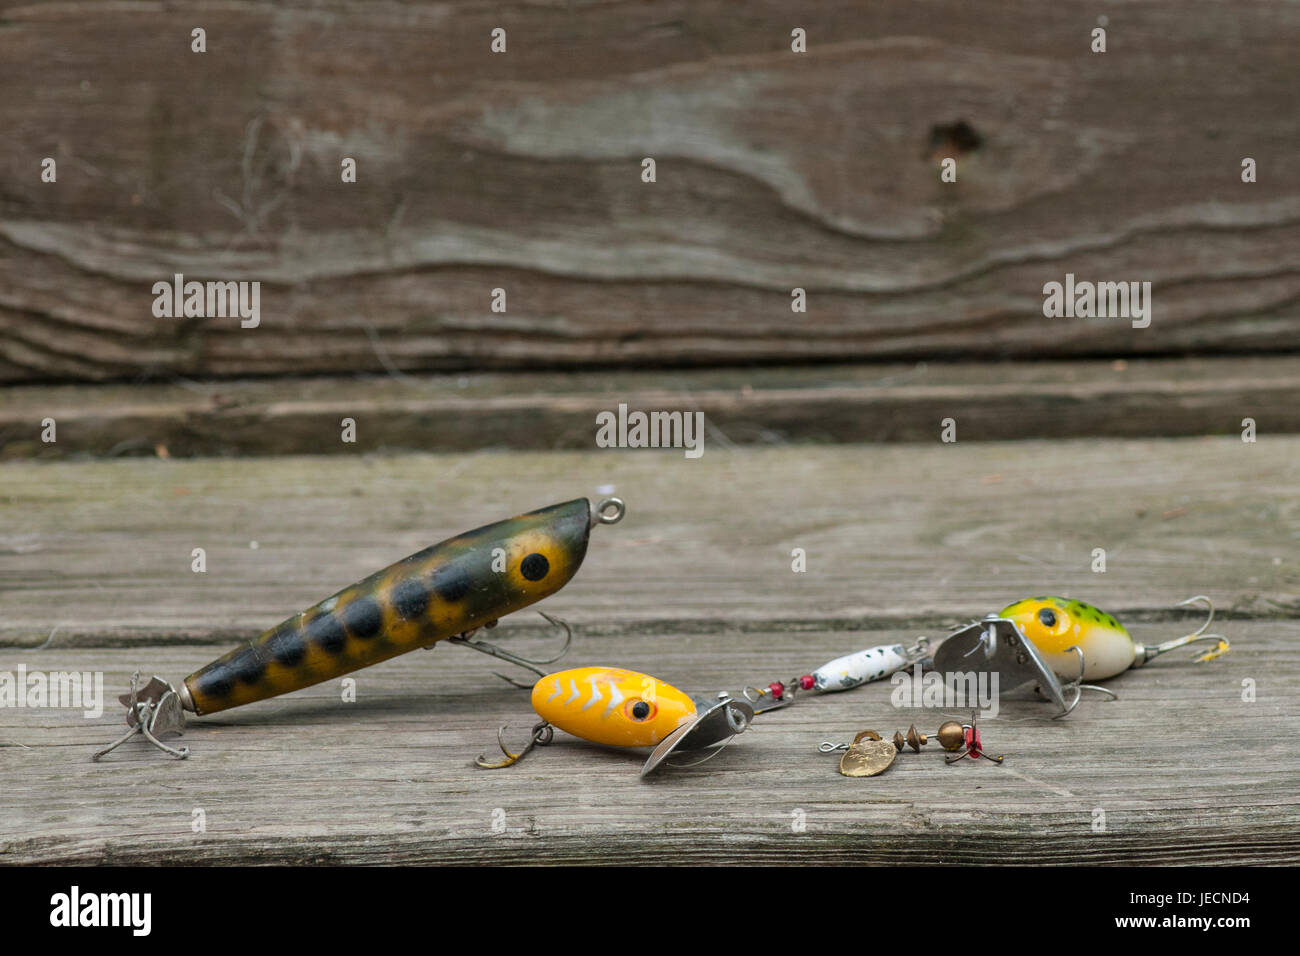 Home - 3D Photos of My Vintage Fishing Lures